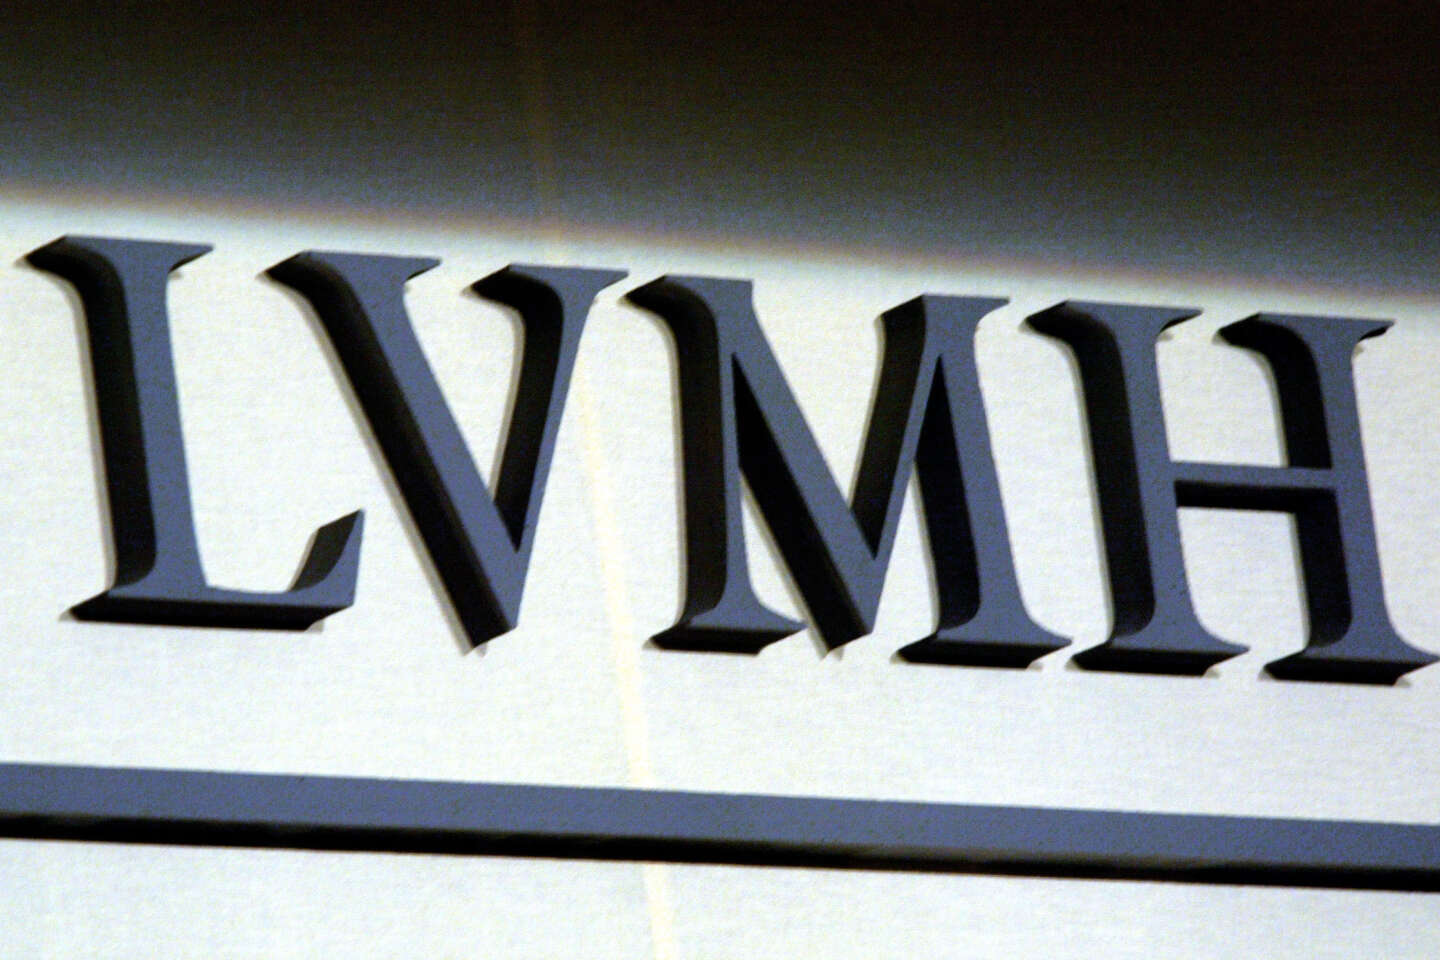 groupe lvmh marques